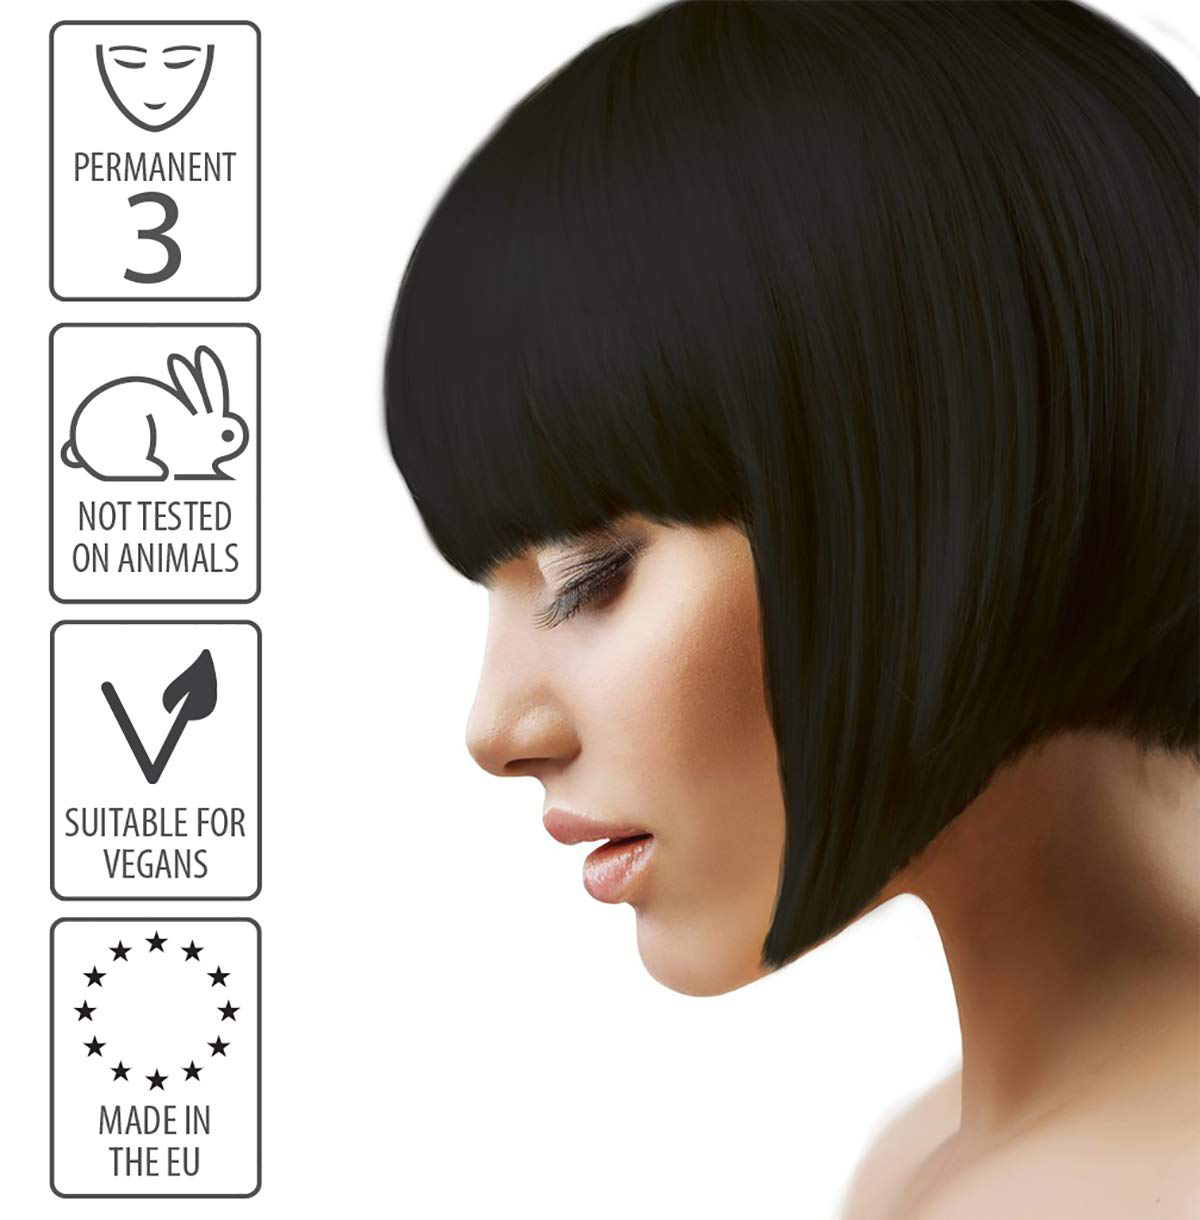 Pure Black hair dye Not tested on animals, Suitable for vegans